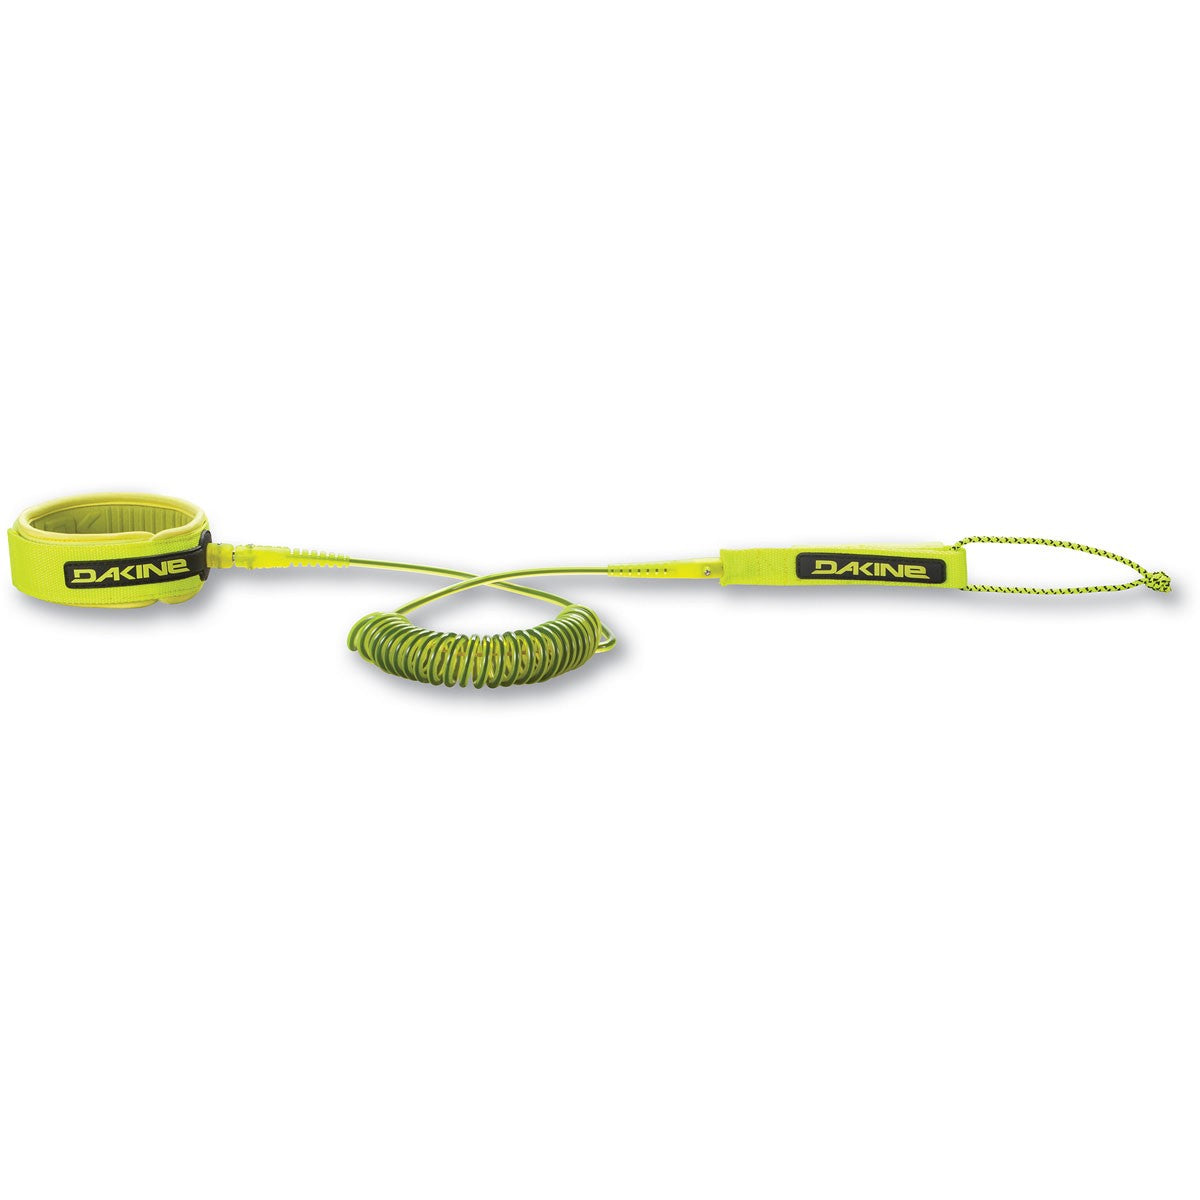 Dakine Coiled Ankle SUP Leash Sulphur 10ft0in x 1/4in